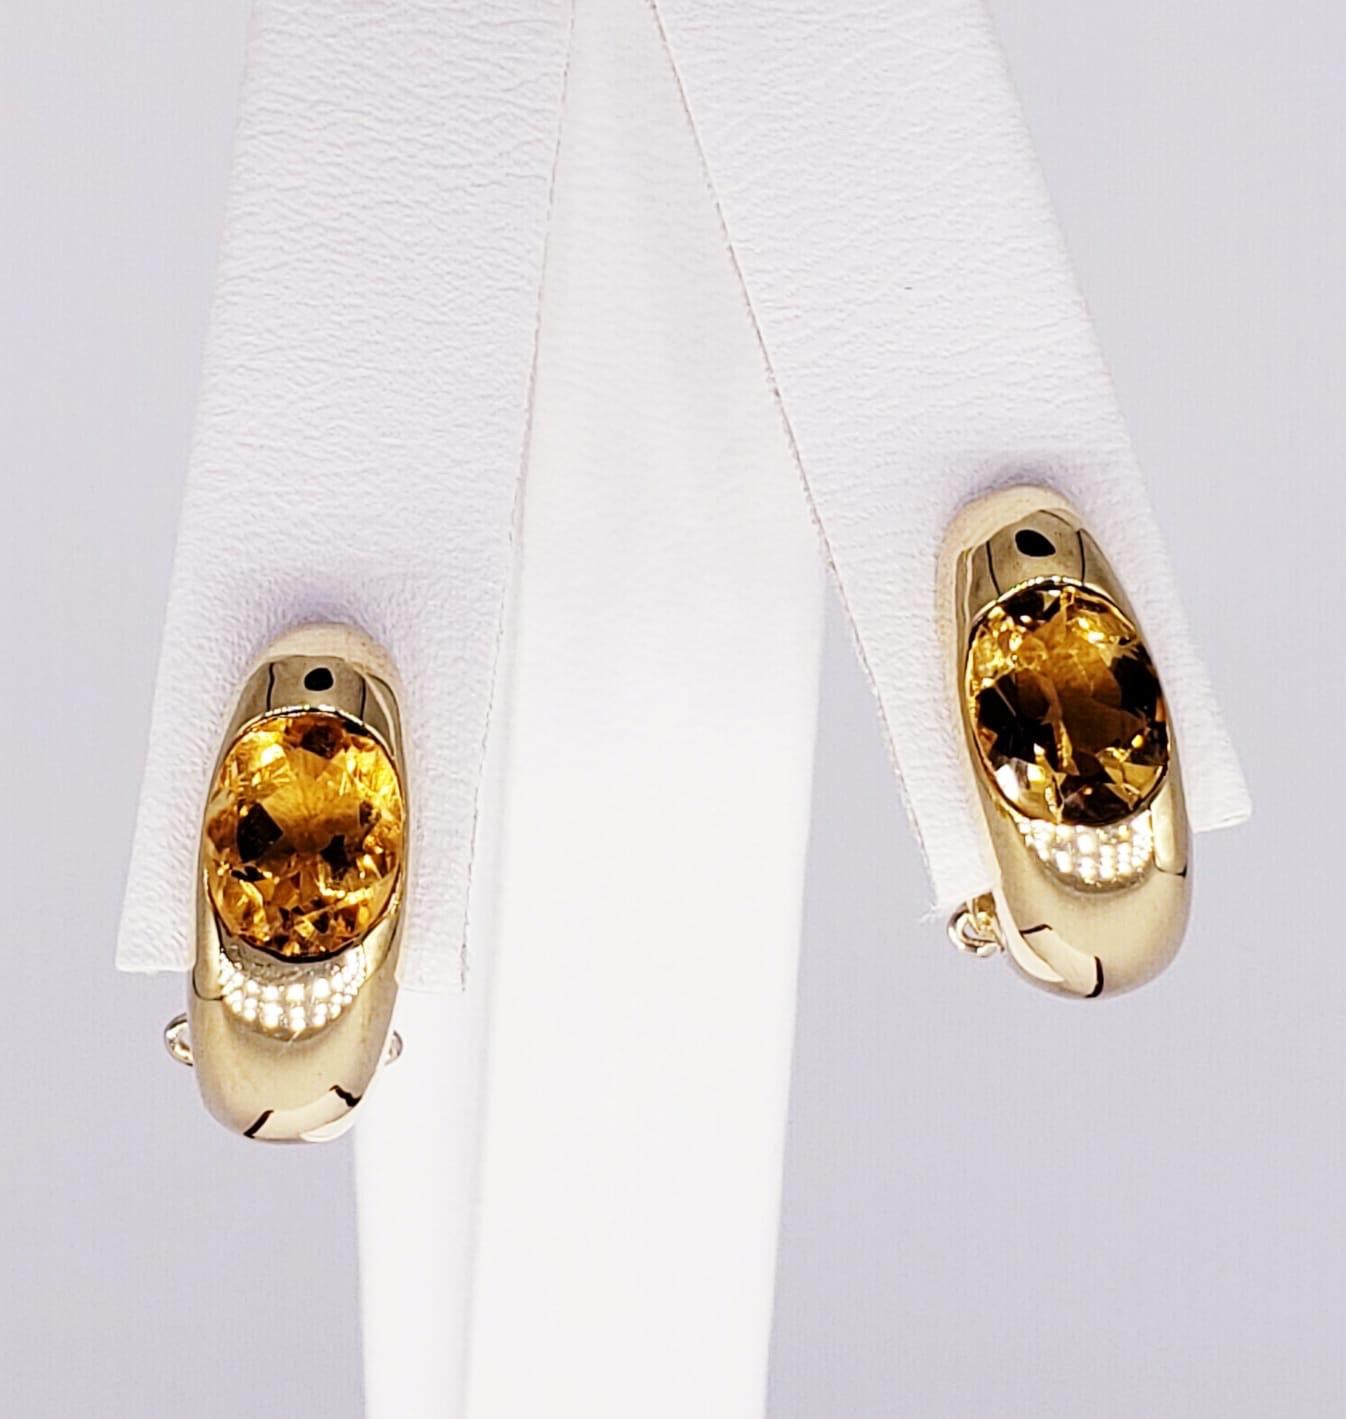 Oval 1.21 Carat Citrine Gem 18k Gold Earrings. The earrings measure 6.80mm X 16.70mm. The total carat weight of the citrine gems are approx 1.21 carats. Beautiful clip back classic design earrings by Italian designer stamped 1360 VI & 750 for gold